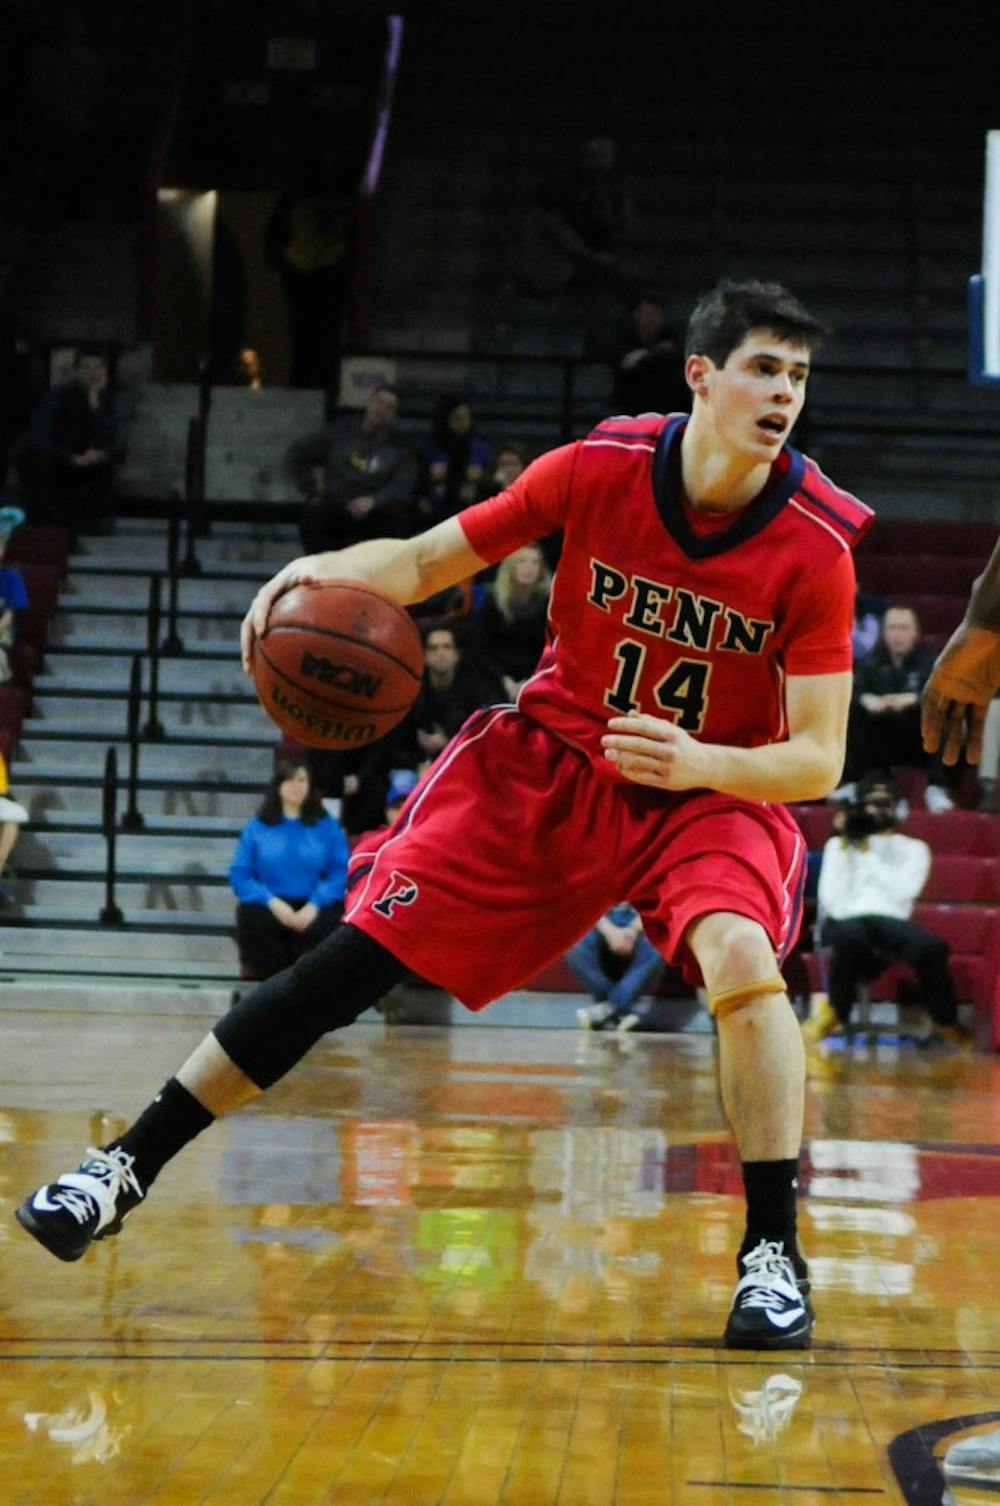 Sophomore guard Matt Poplawski scored a career high seven points and hit two three pointers as Penn basketball narrowly fell to Dartmouth, 67-62.